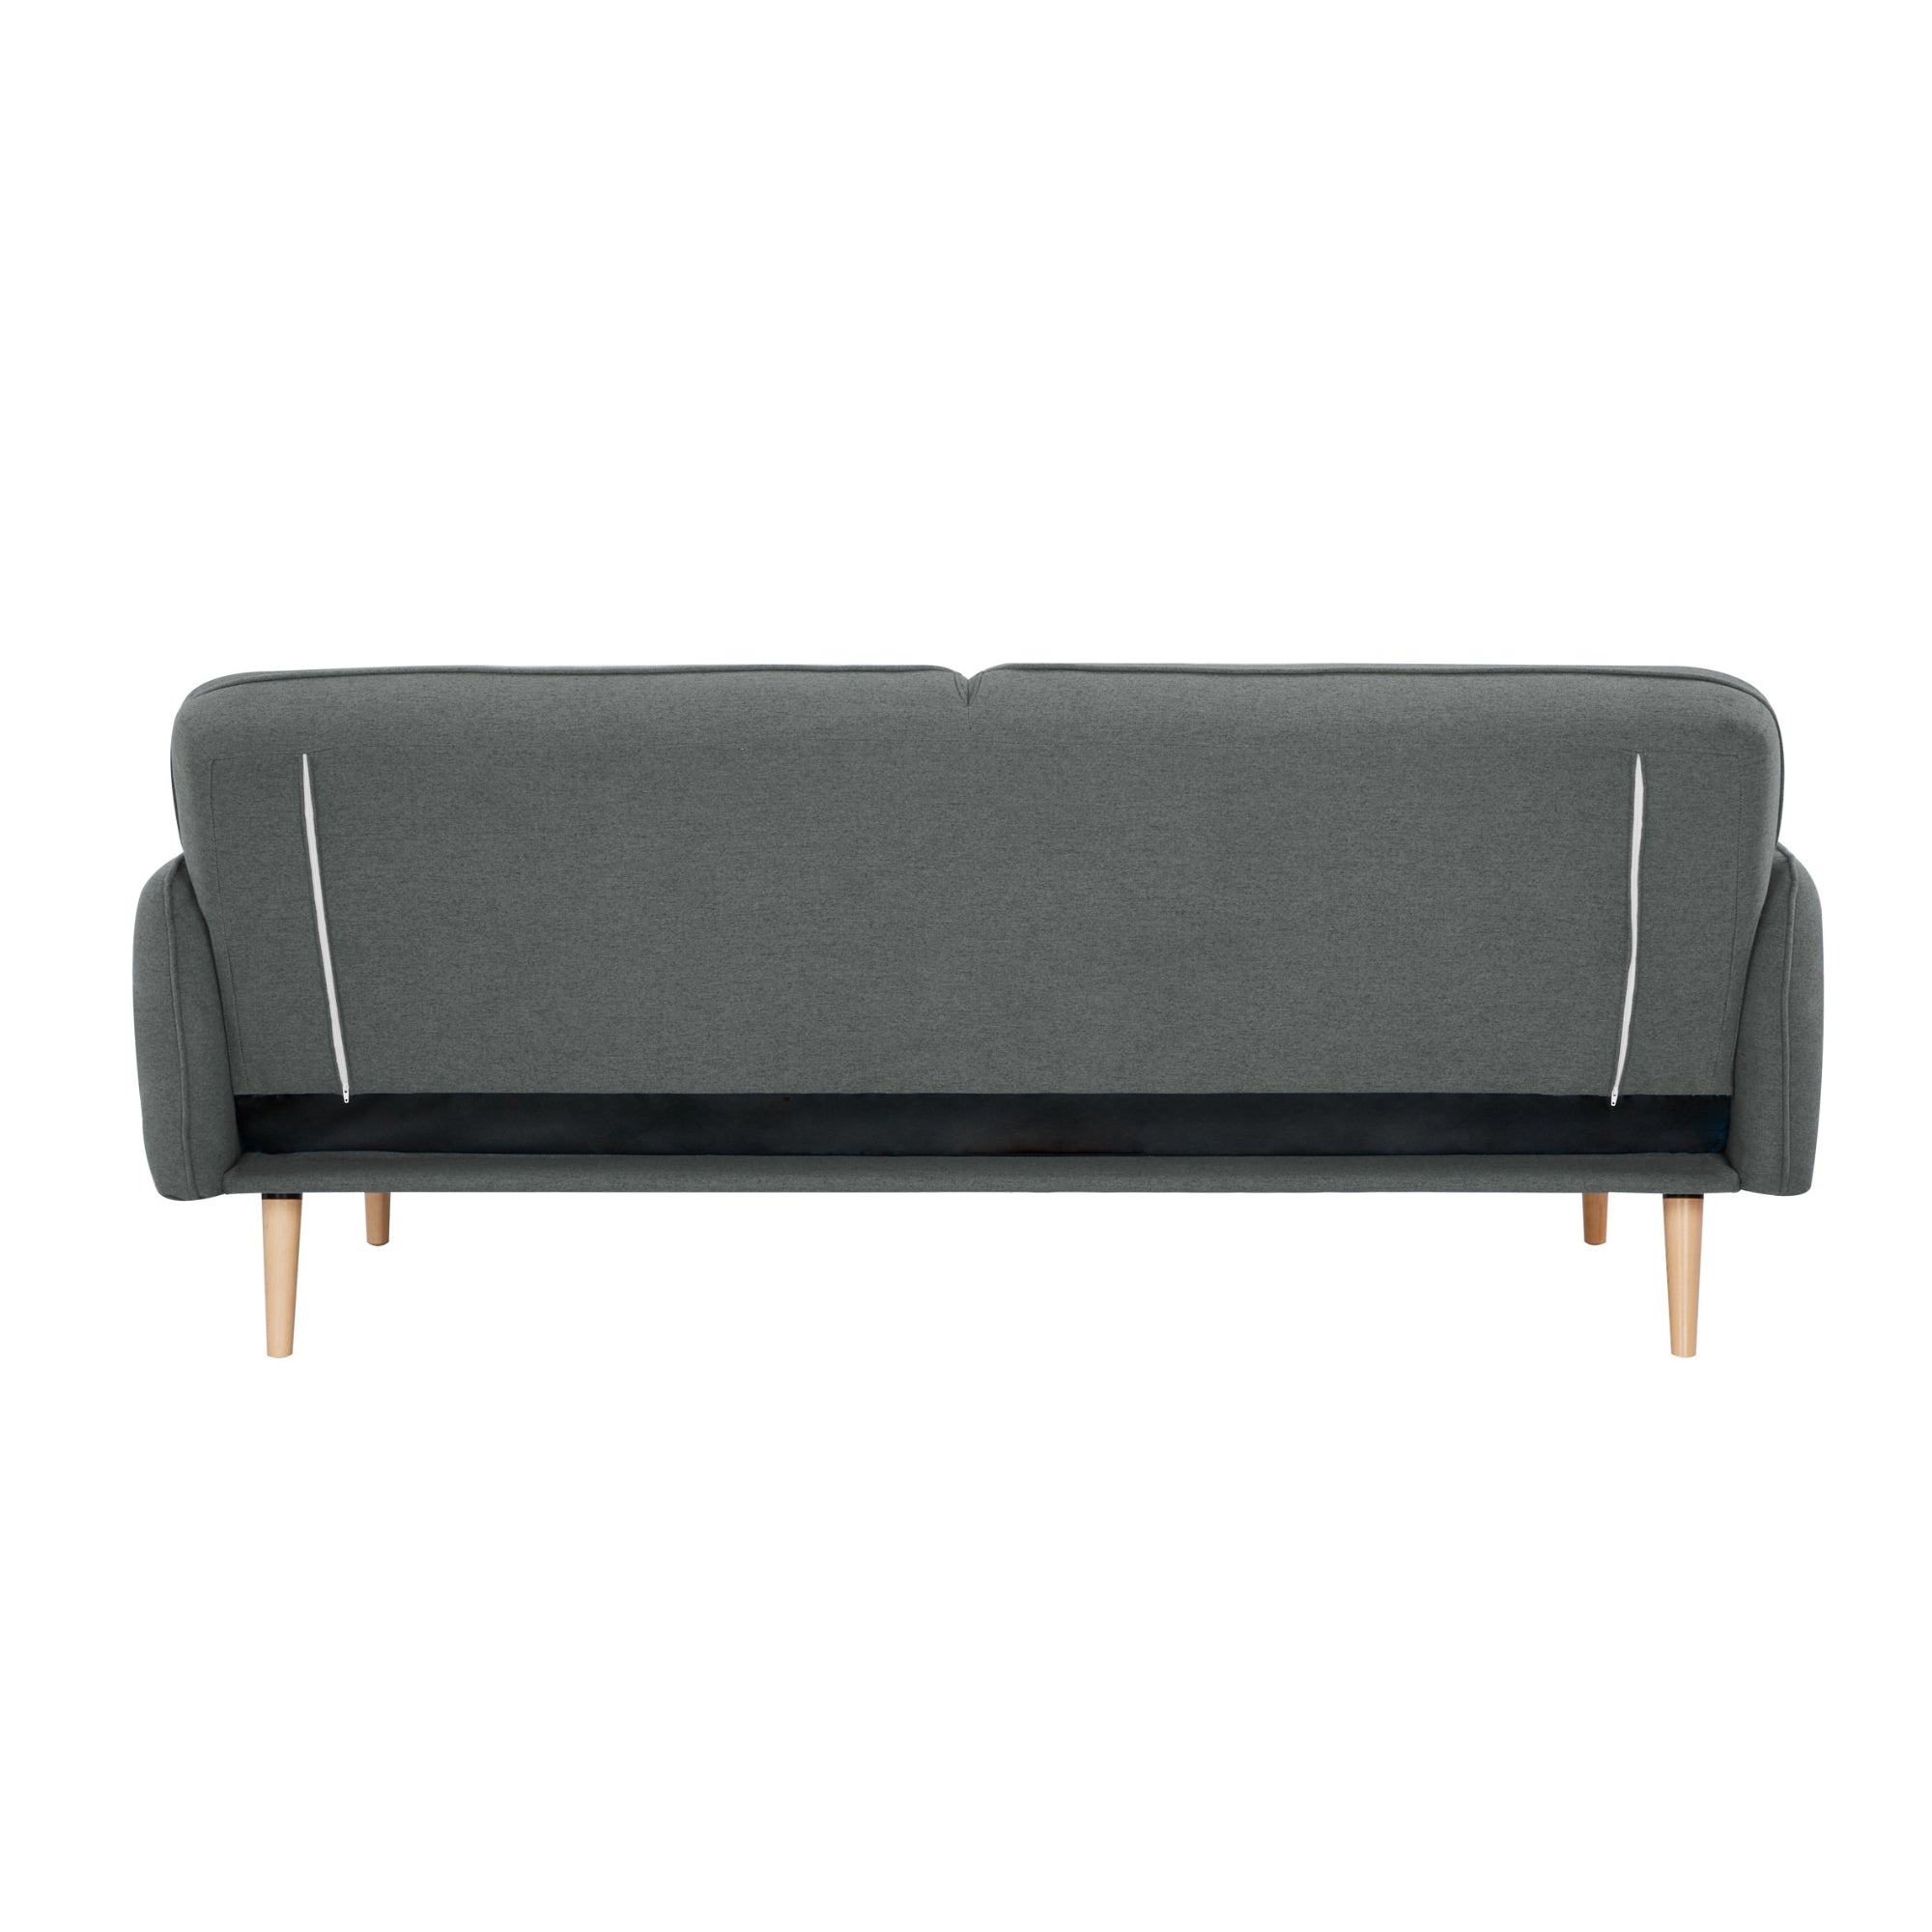 Mid Grey Fabric 3-Seater Sofa Bed, Plush Upholstery